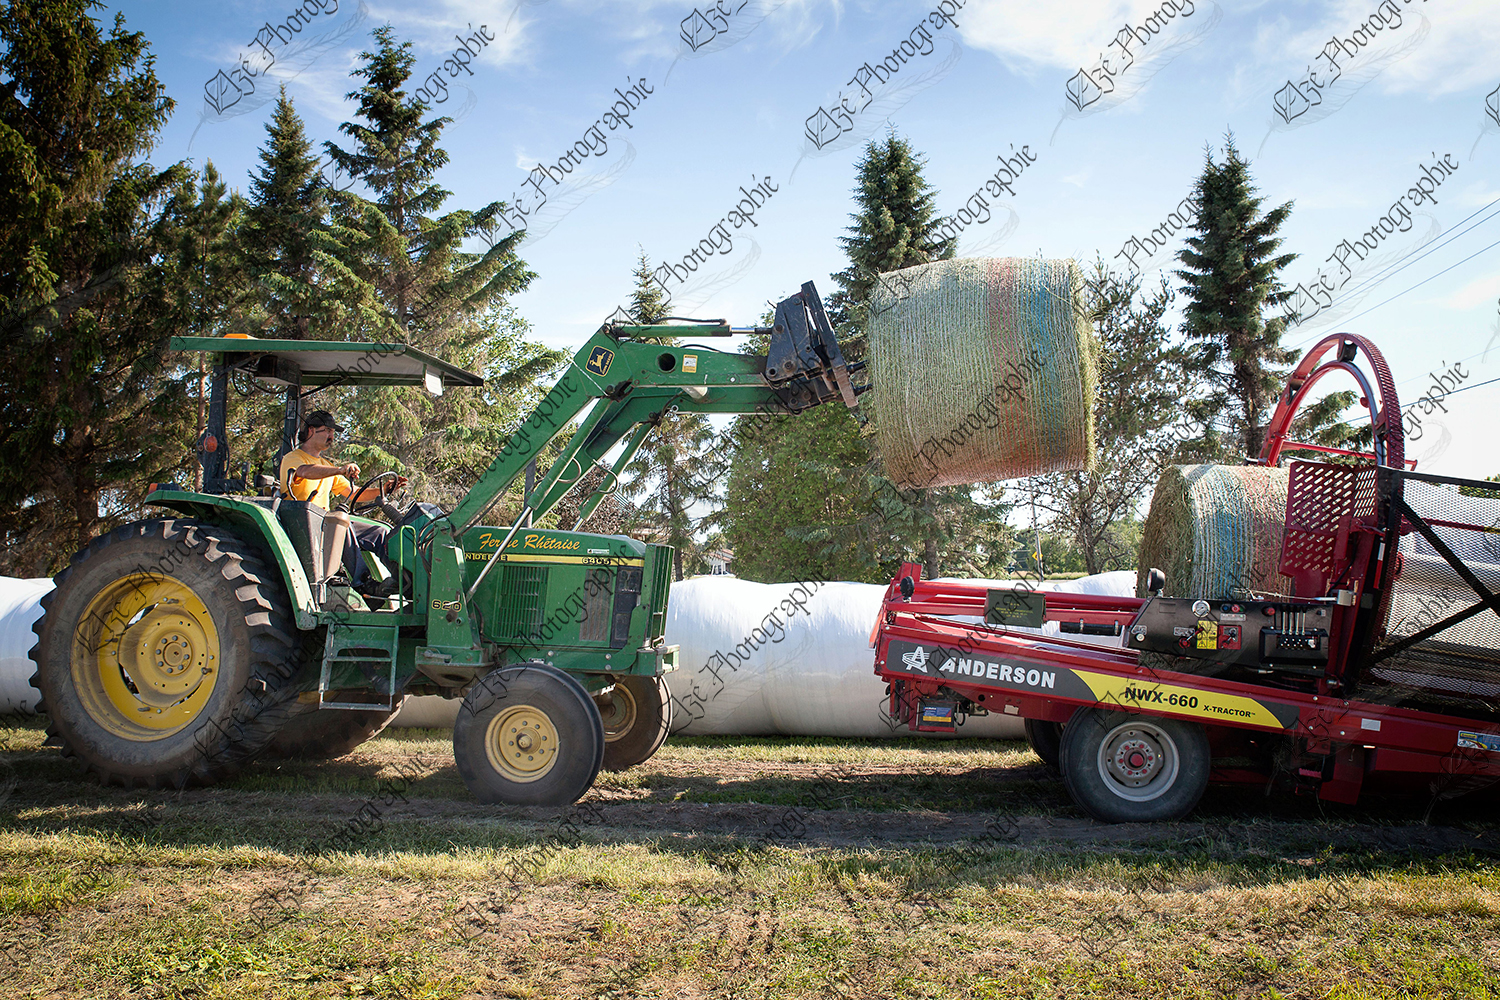 elze_photo_9379_machine_anderson_foin_hay_wrapping